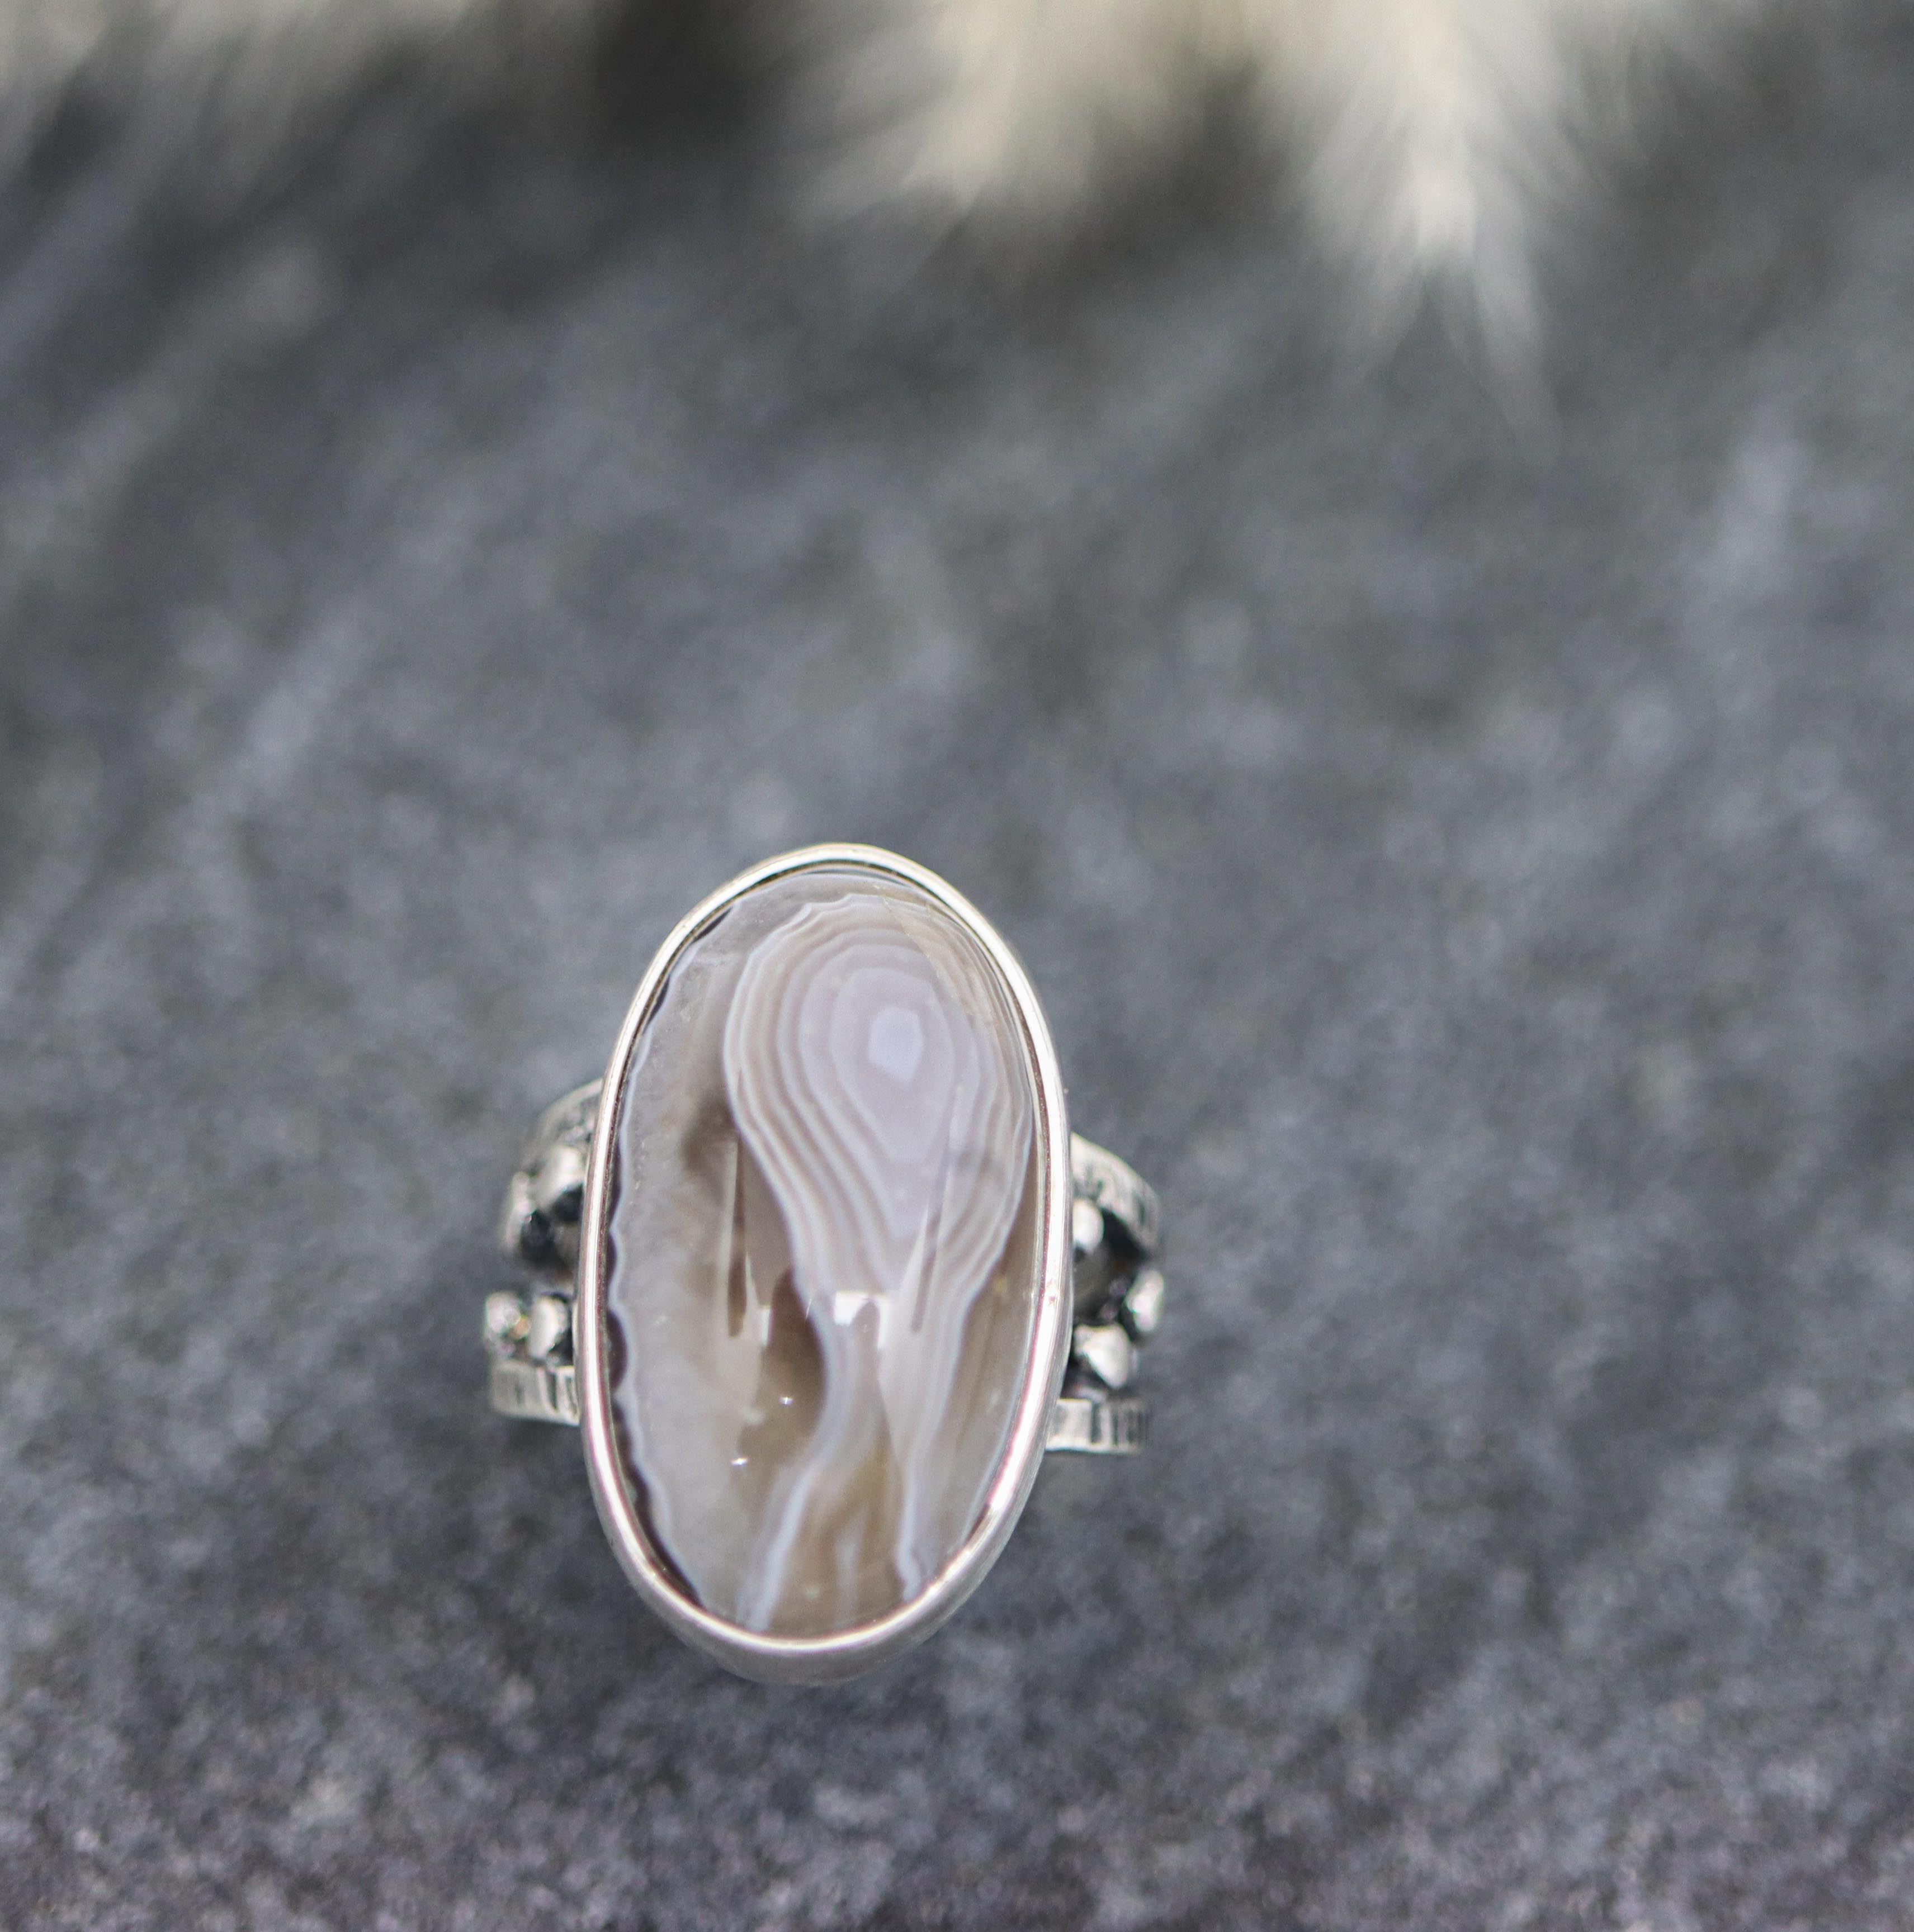 Botswana Agate Sterling Silver Bubble Band Ring Size 7